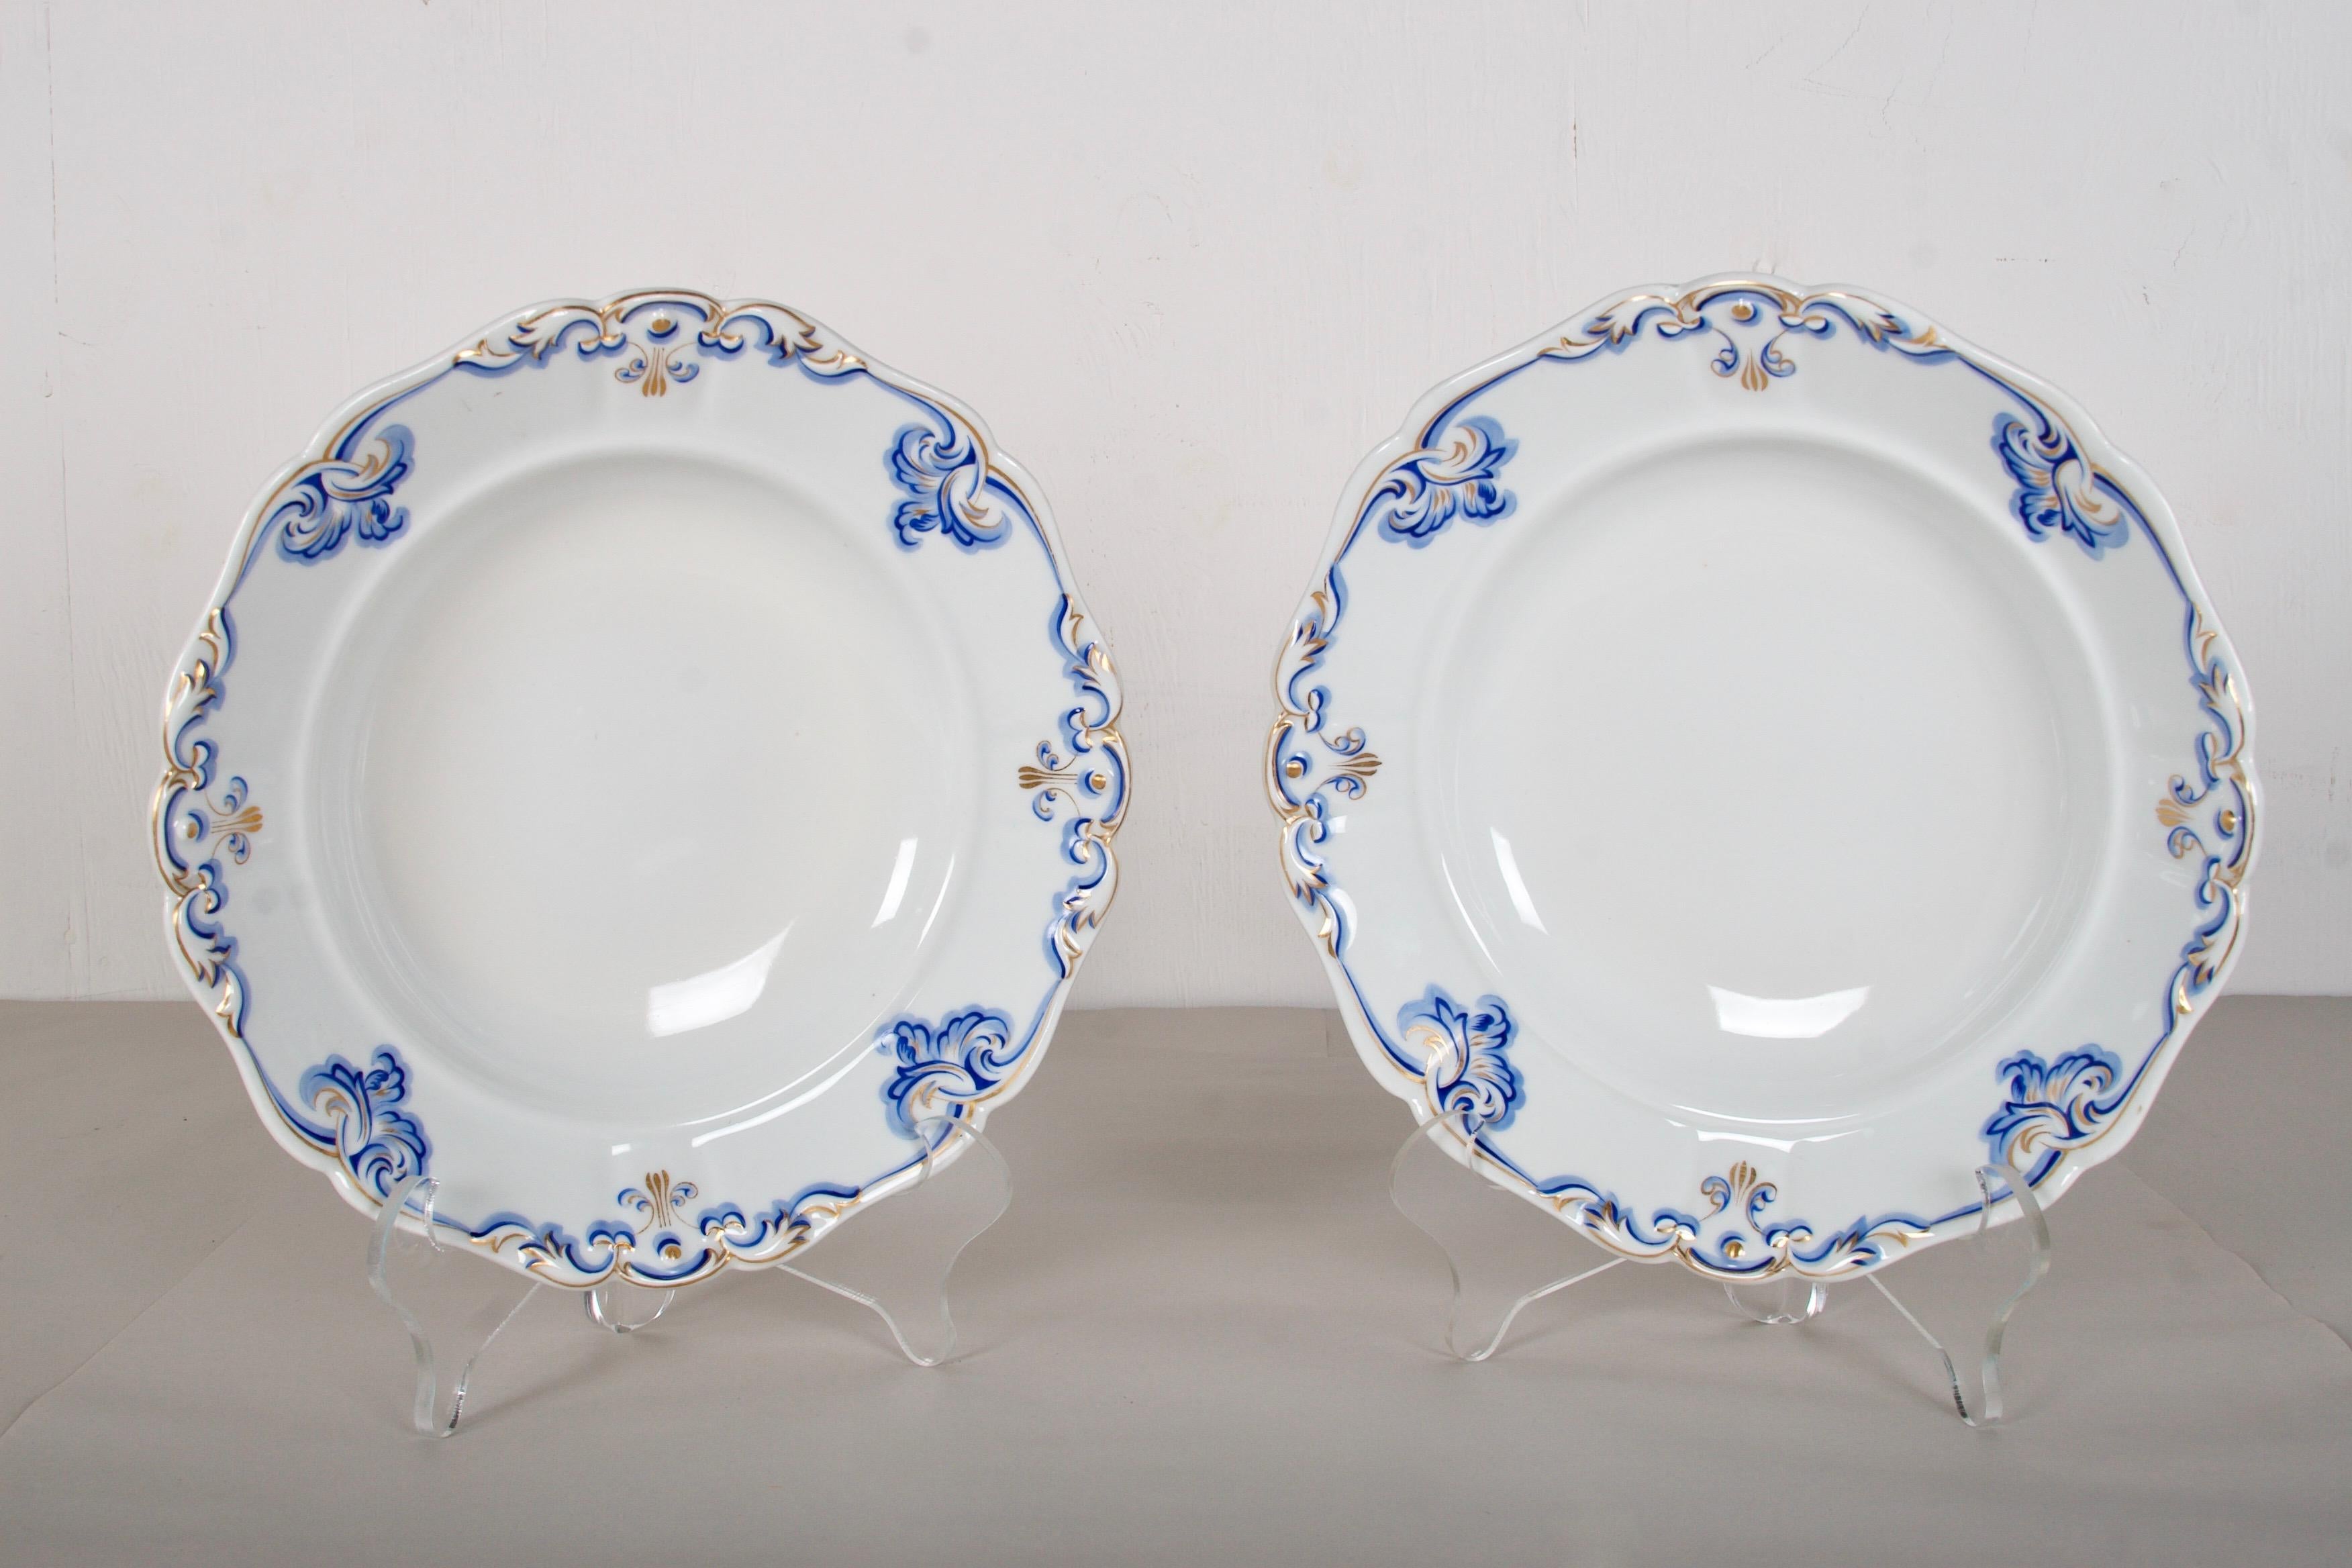 1851 Imperial Vienna Porcelain 27 piece Service for 18, very rare For Sale 2